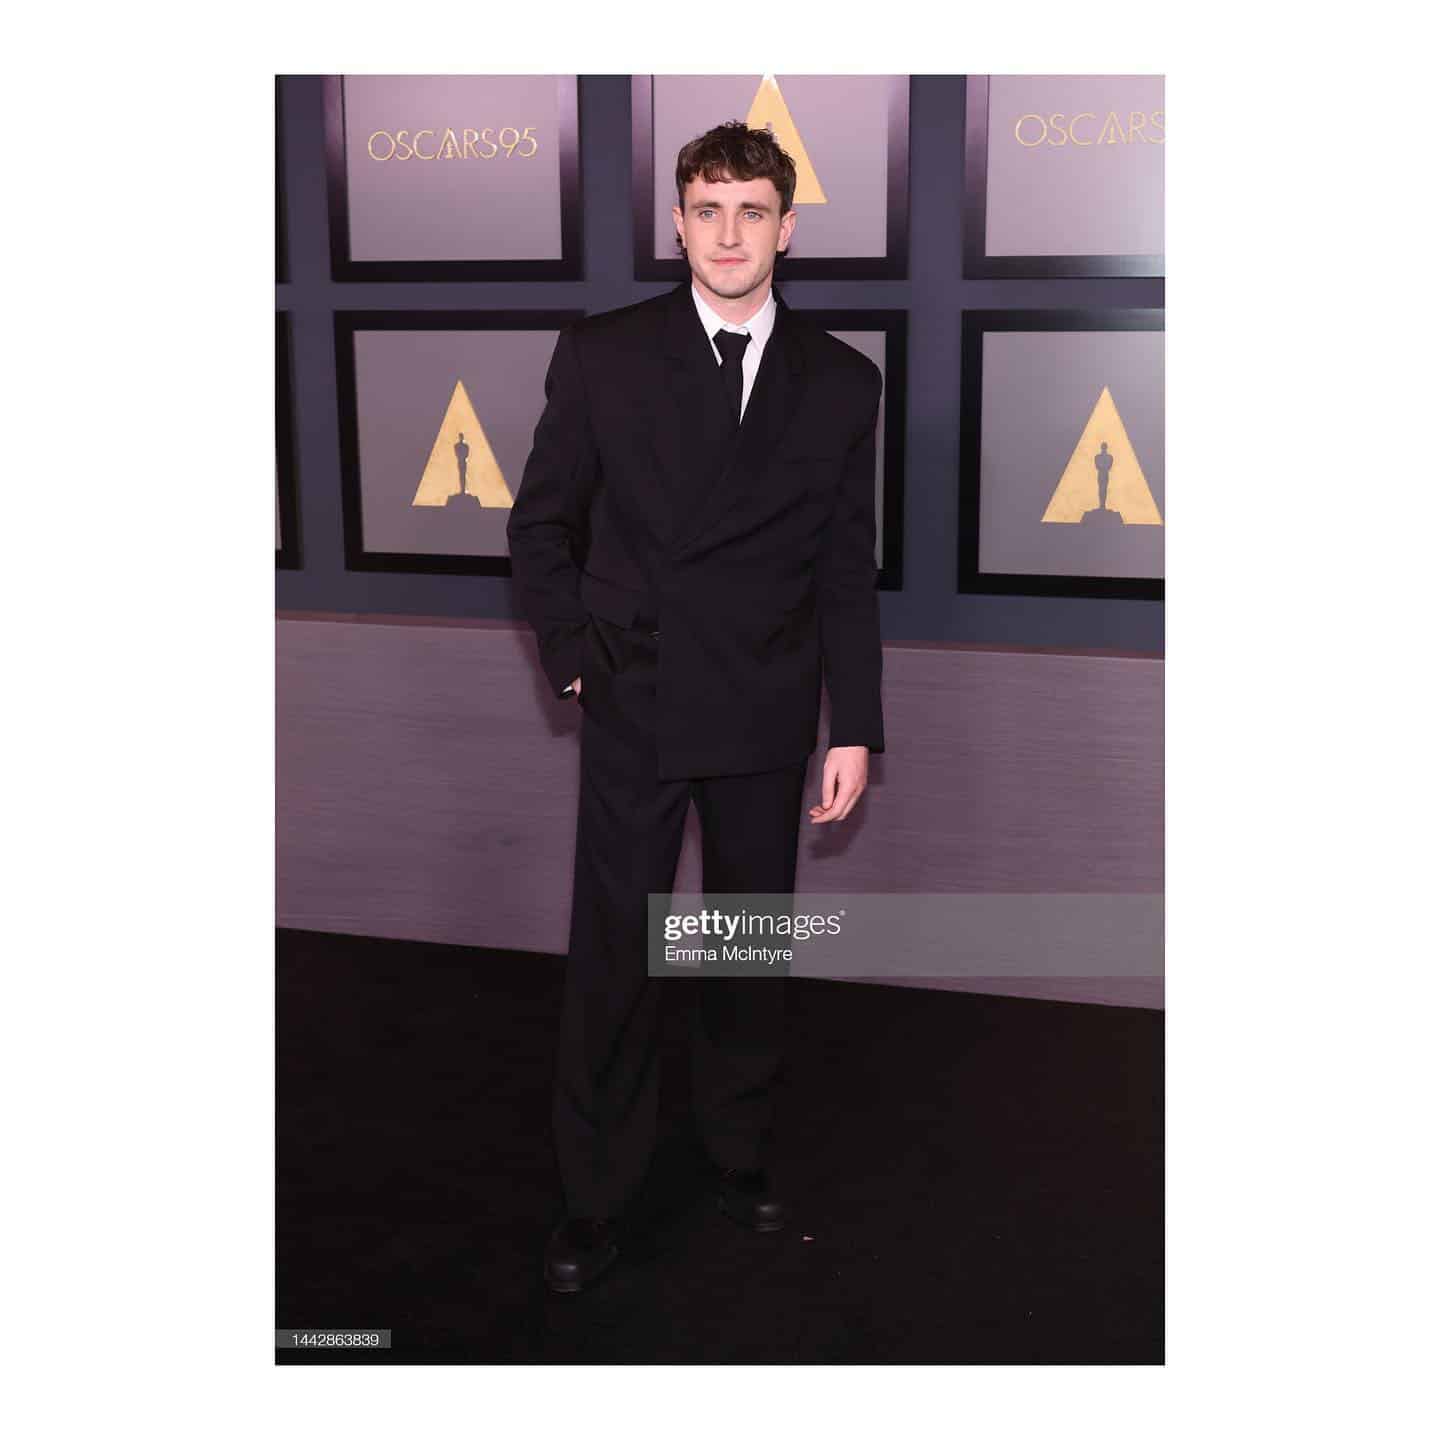 at the Academy Of Motion Picture Arts And Sciences 13th Governors Awards on Saturday night in LA 
.
.
.
📸 @gettyimages 
‍♂️ @nellichristine 
 @felicitykay 
.
.
.